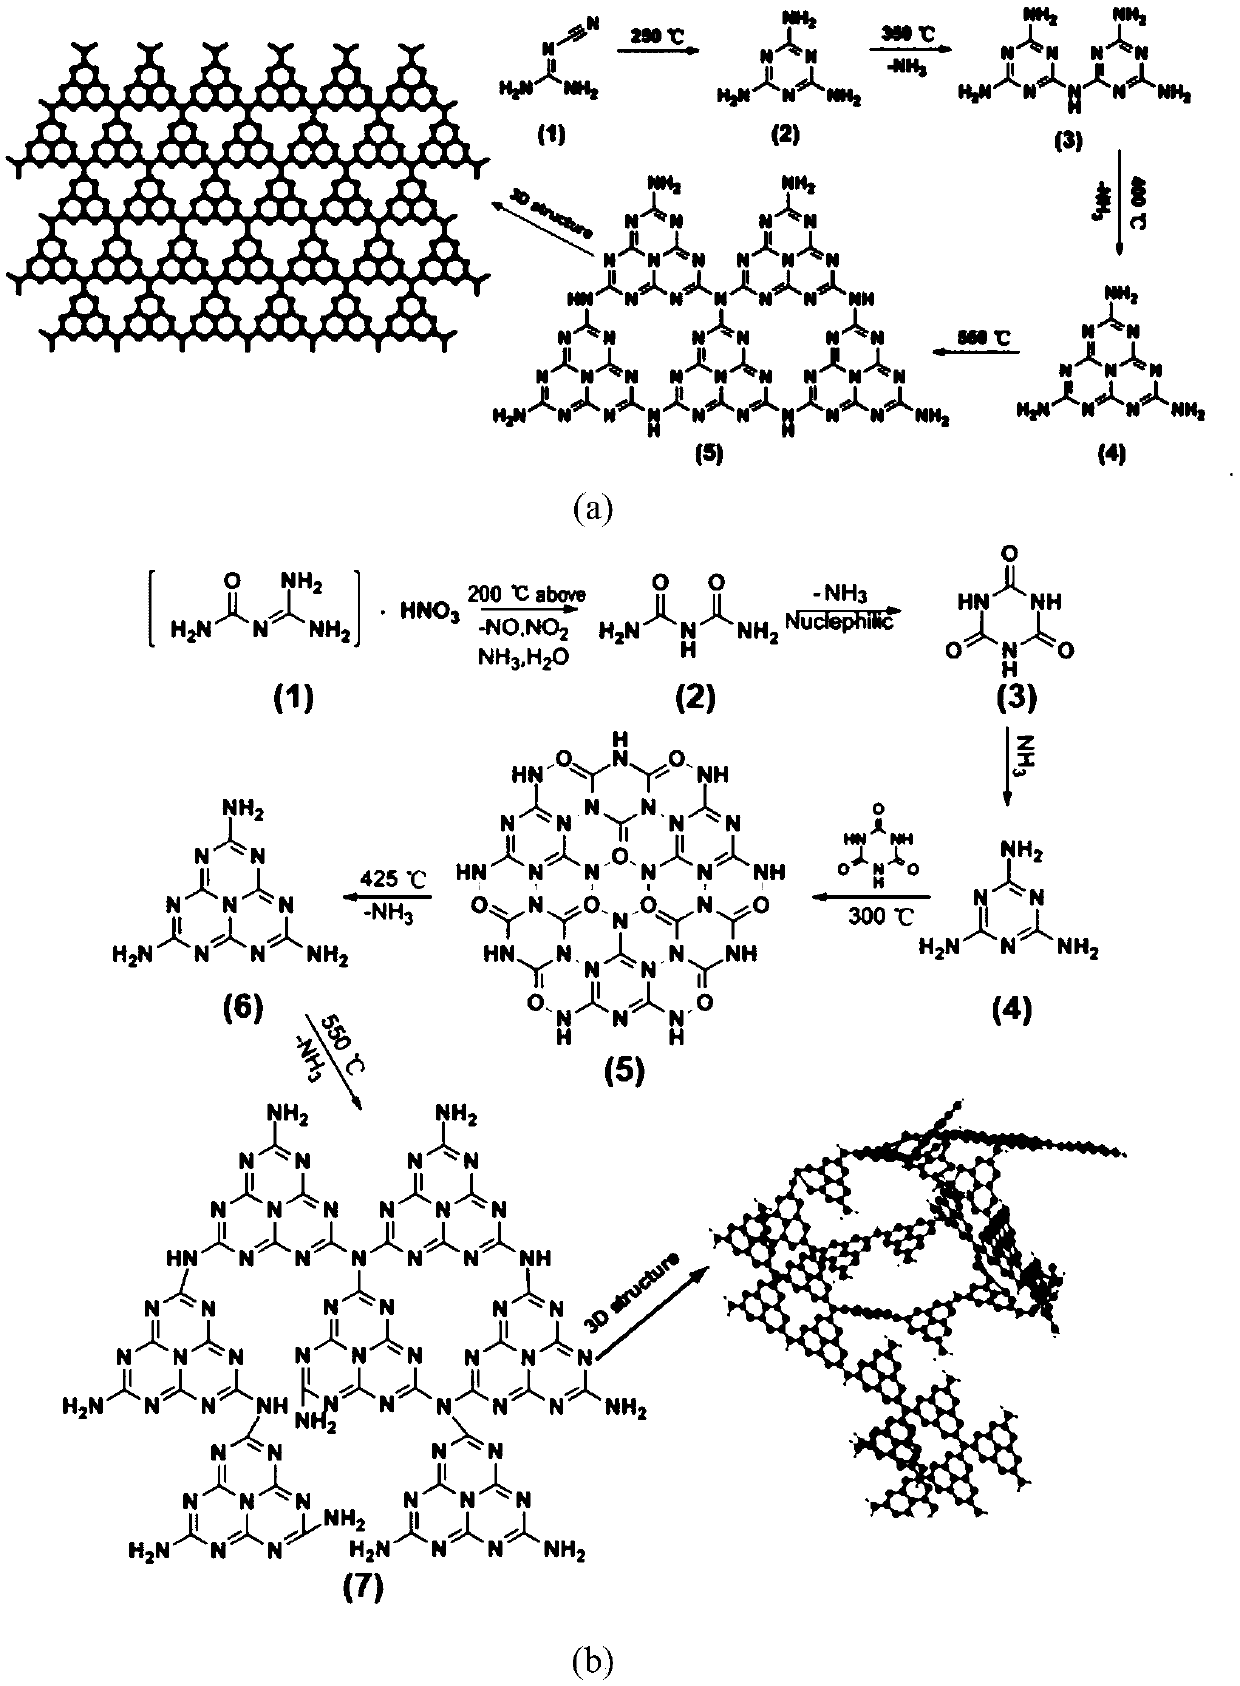 Graphite-phase carbon nitride material for catalytic reduction of p-nitrophenol as well as preparation method and application of graphite-phase carbon nitride material